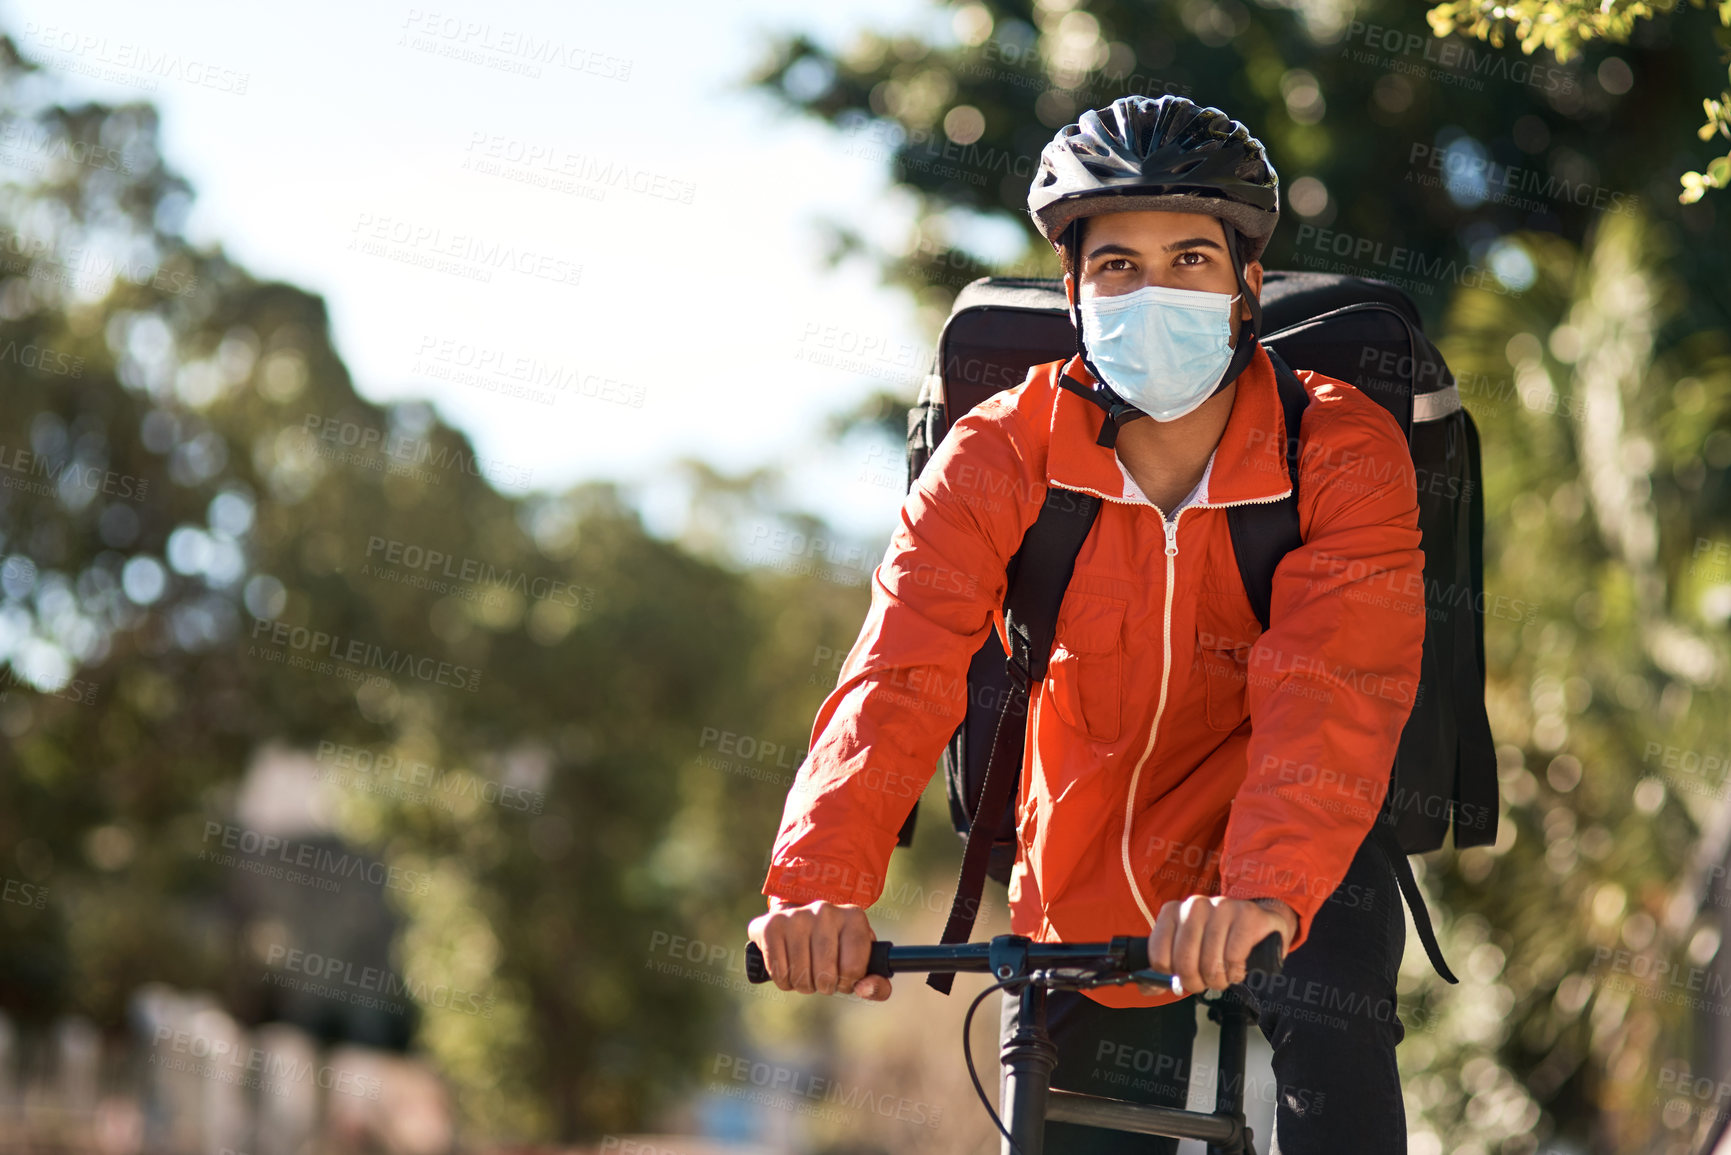 Buy stock photo Shot of a masked man out on his bicycle to do a delivery